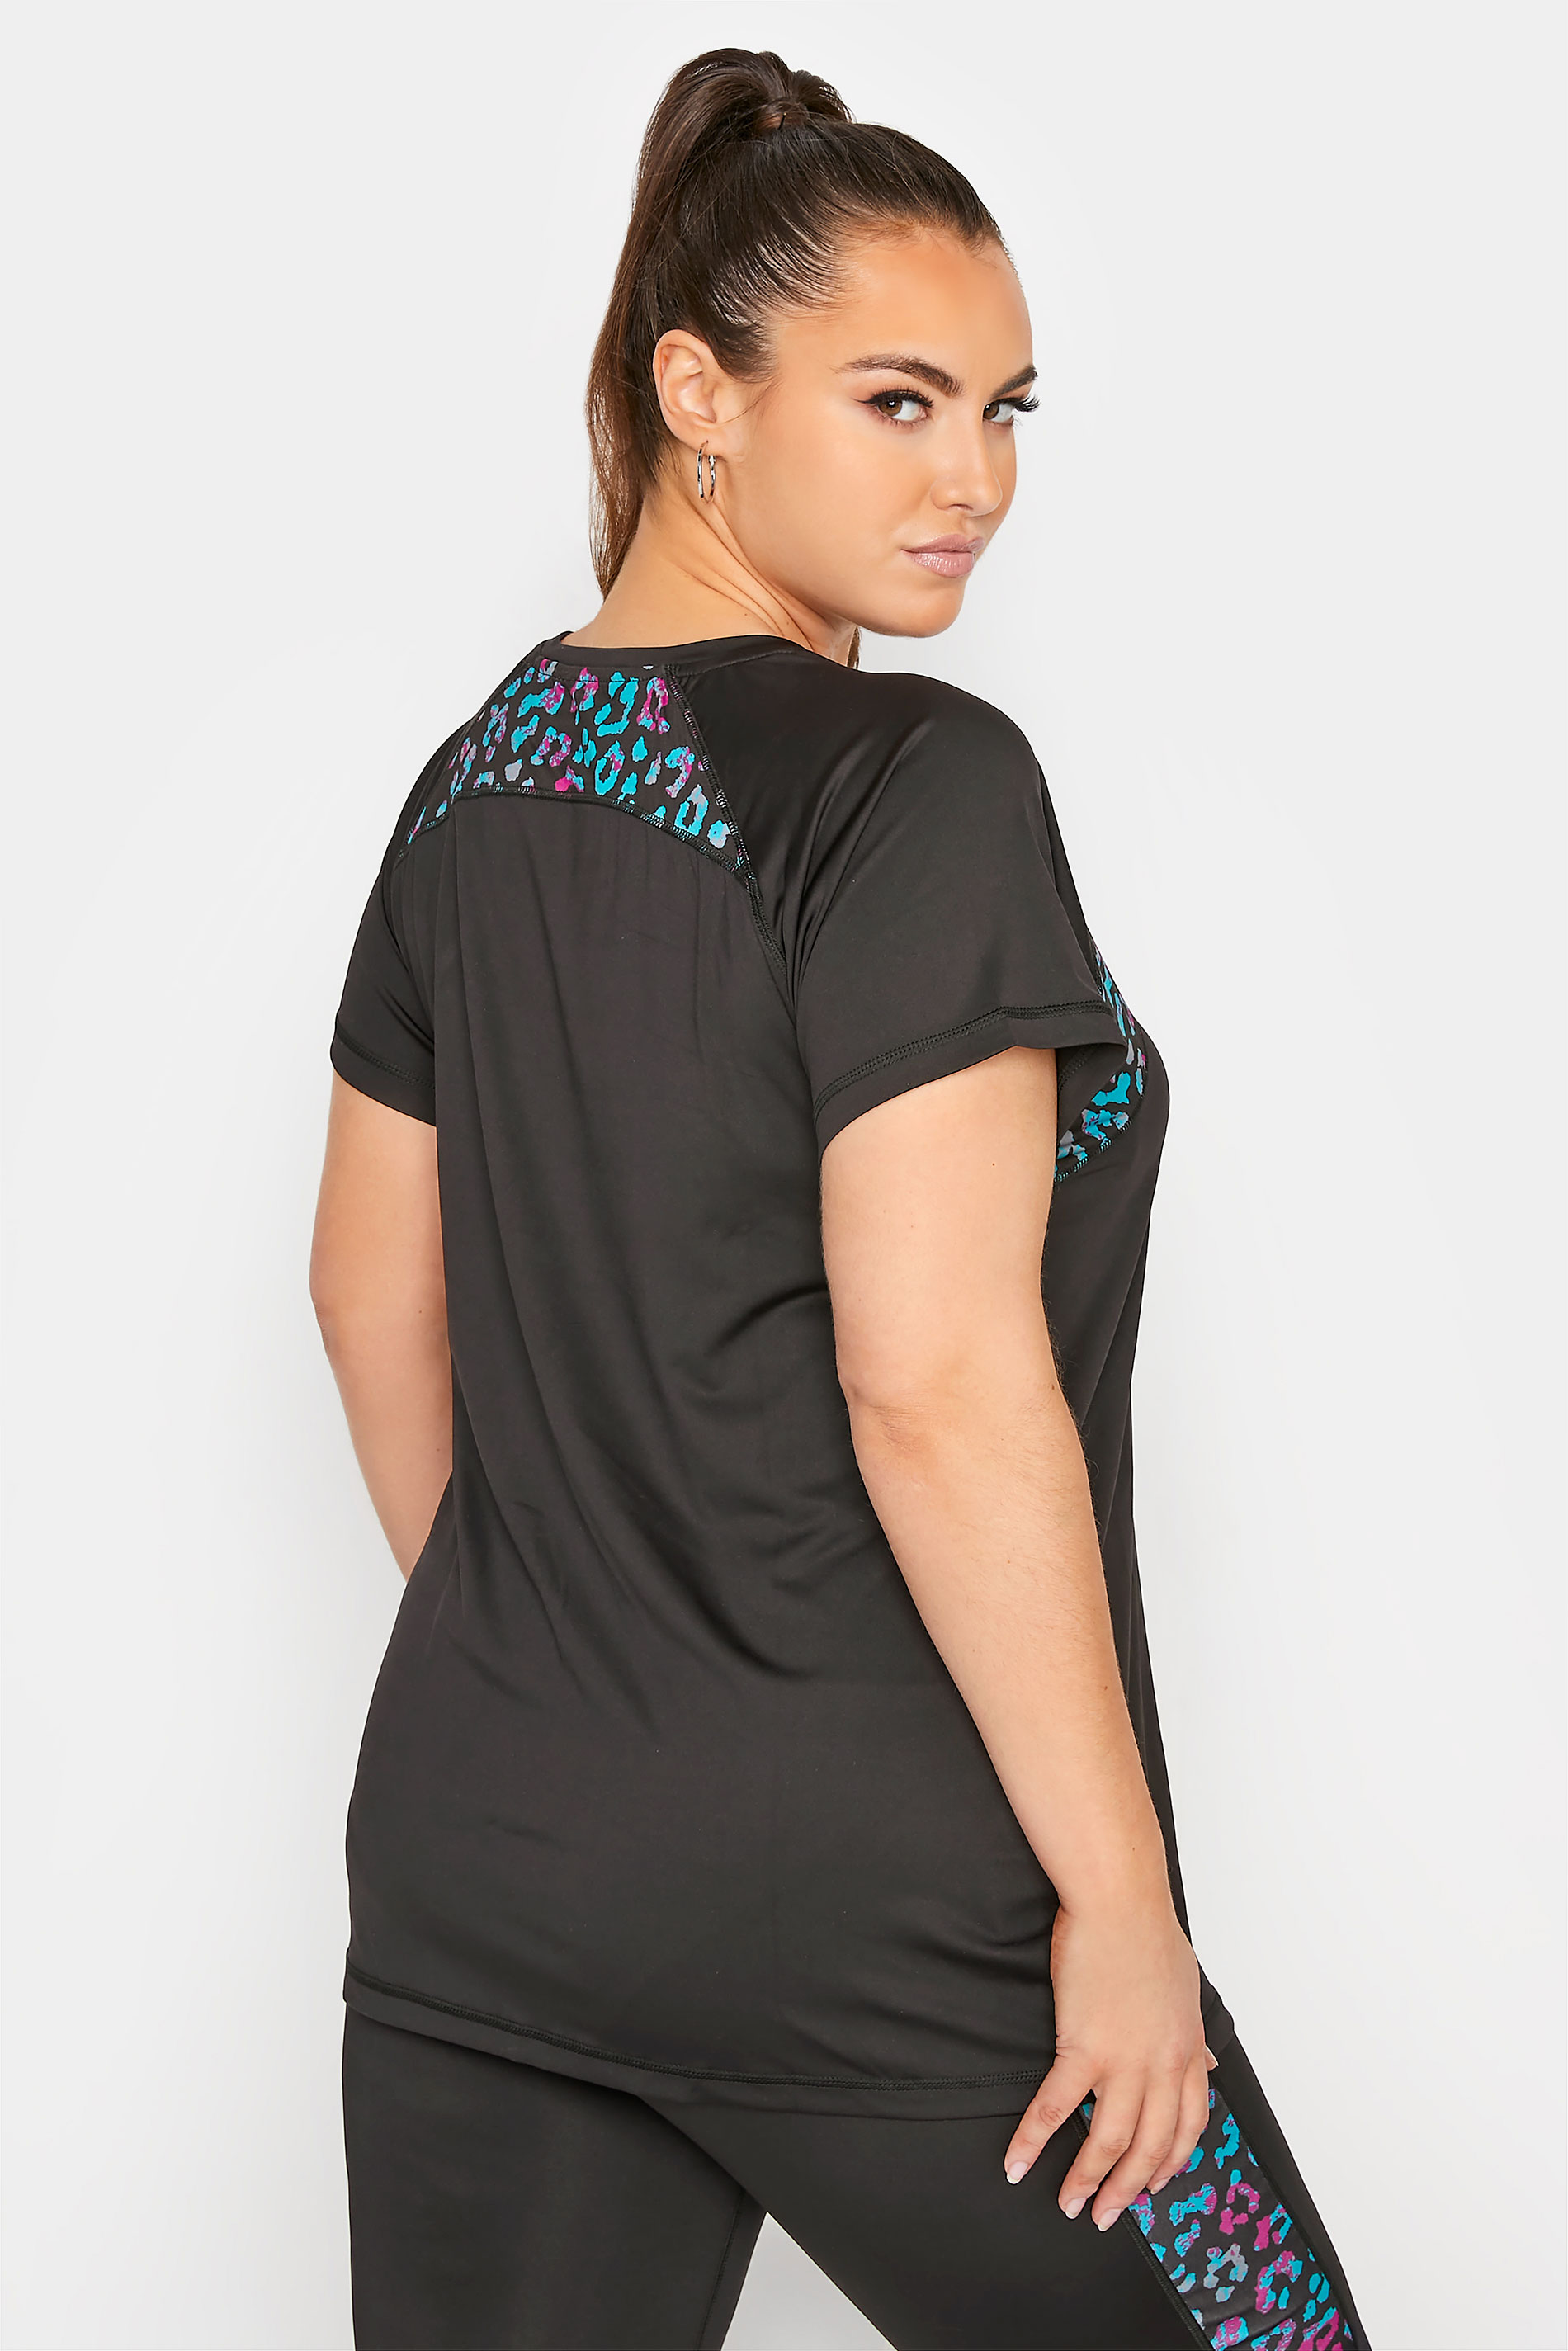 Grande taille  Activewear Grande Taille Grande taille  Active Tops | ACTIVE - T-Shirt Noir Manches Léopard - OV42483